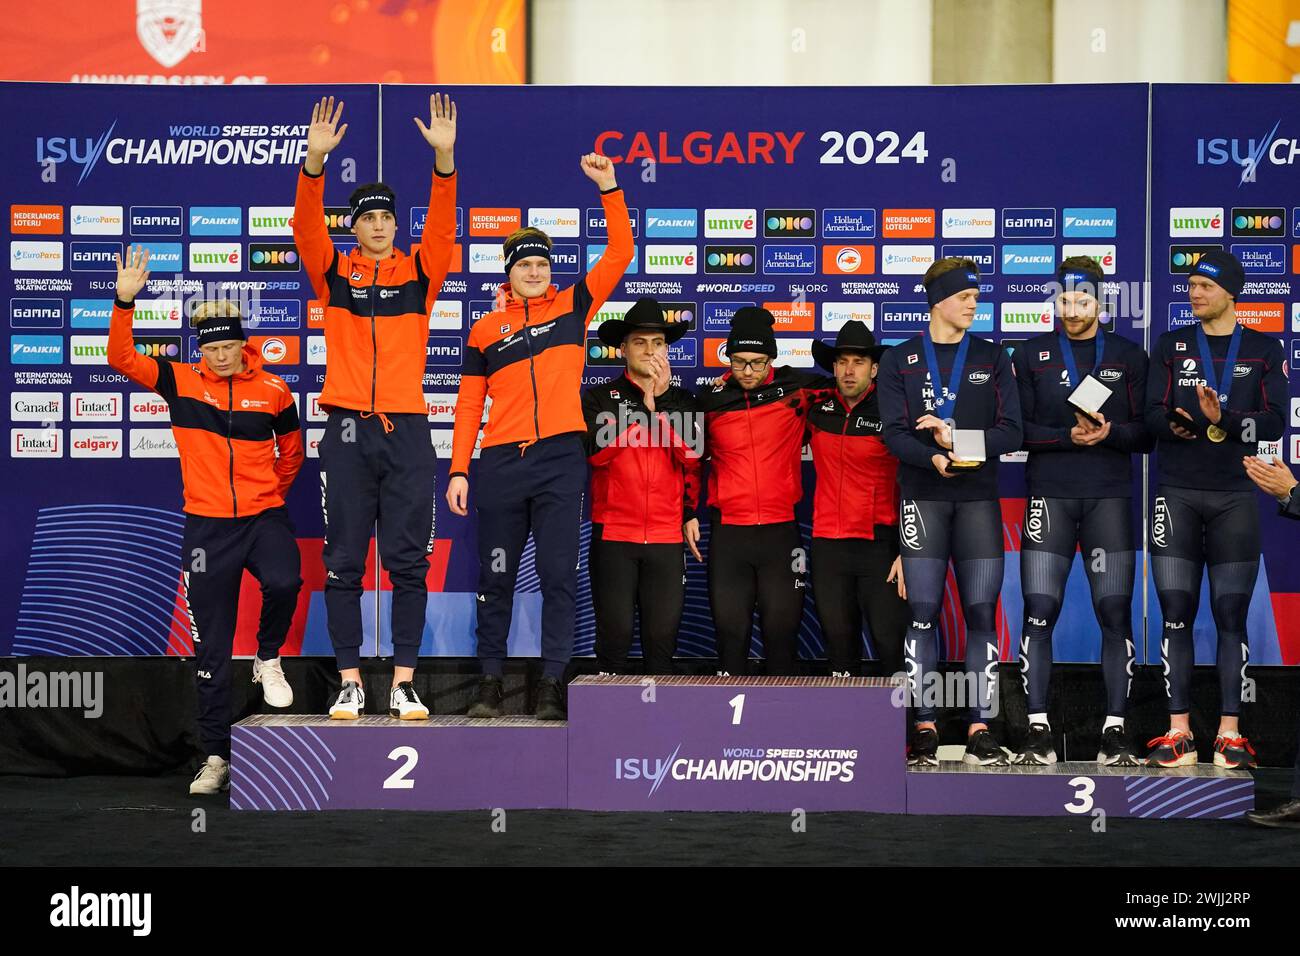 CALGARY, CANADA - FEBRUARY 16: Jenning de Boo of the Netherlands, Tim Prins of the Netherlands and Janno Botman of the Netherlands, Anders Johnson of Canada, Laurent Dubreuil of Canada and Antoine Gelinas Beaulieu of Canada, Henrik Fagerli Rukke of Norway, Bjorn Magnussen of Norway and Havard Holmefjord Lorentzen of Norway during the podium ceremony after competing on the Men's Team Sprint during the ISU World Speed Skating Single Distances Championships at Olympic Oval on February 16, 2024 in Calgary, Canada. (Photo by Andre Weening/Orange Pictures) Stock Photo